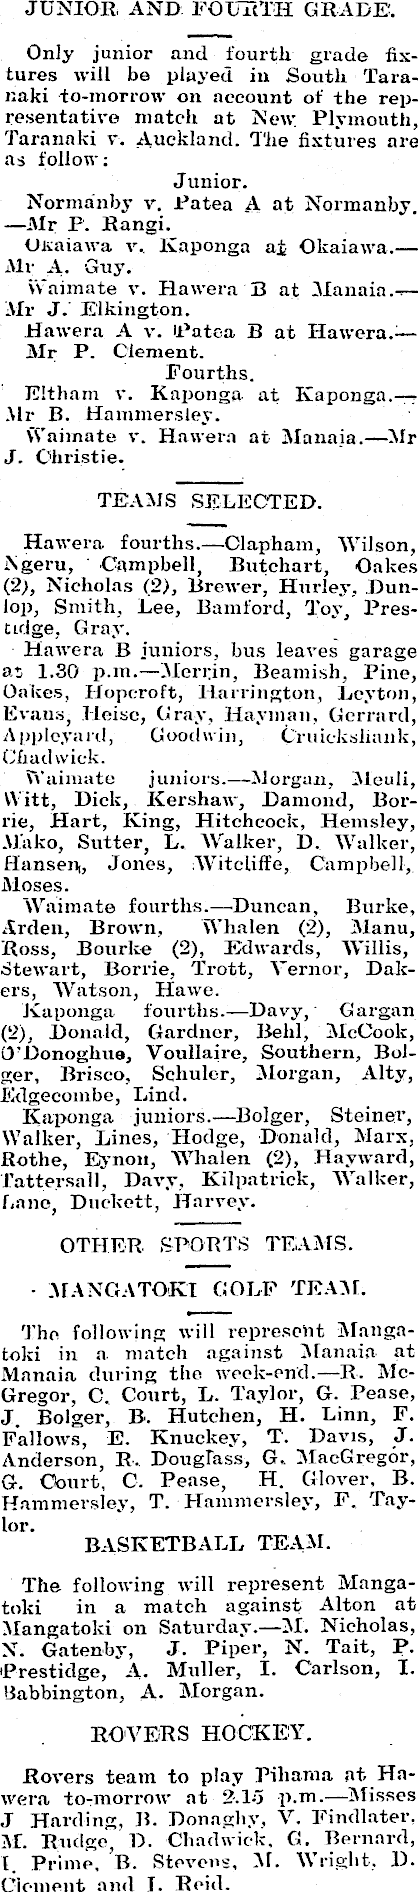 Papers Past Newspapers Hawera Star 26 July 1935 South Taranaki Rugby